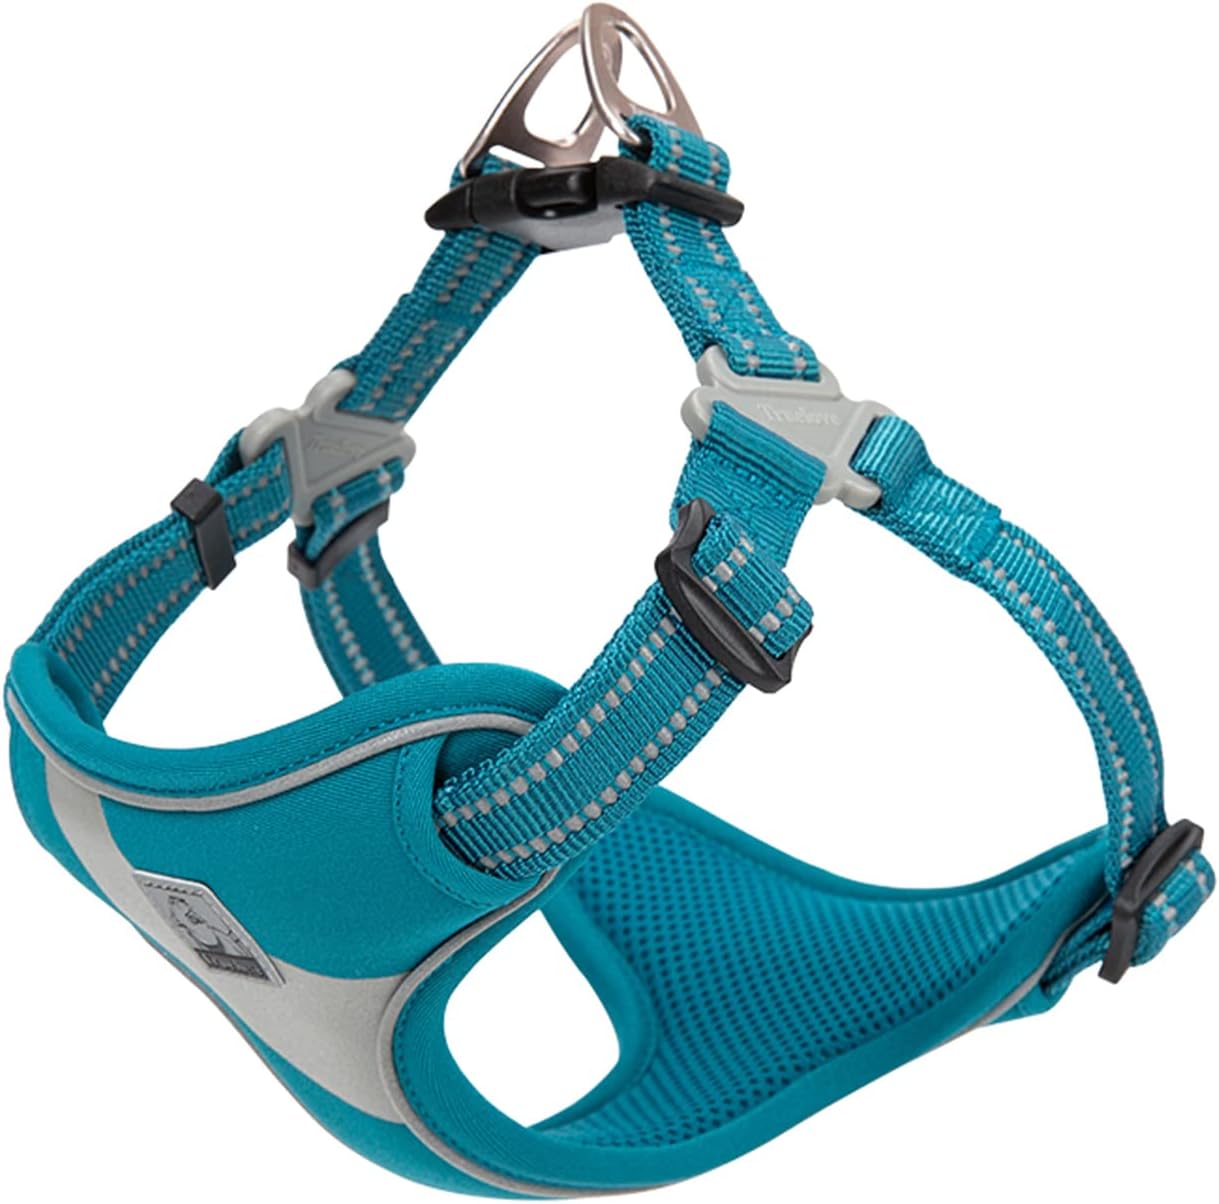 TRUE LOVE Dog Harness TLH5991 Anti Pull Safety Vest Step-in Style Harness for More Comfort and Less Tug Reflective Pet Harness by Truelove